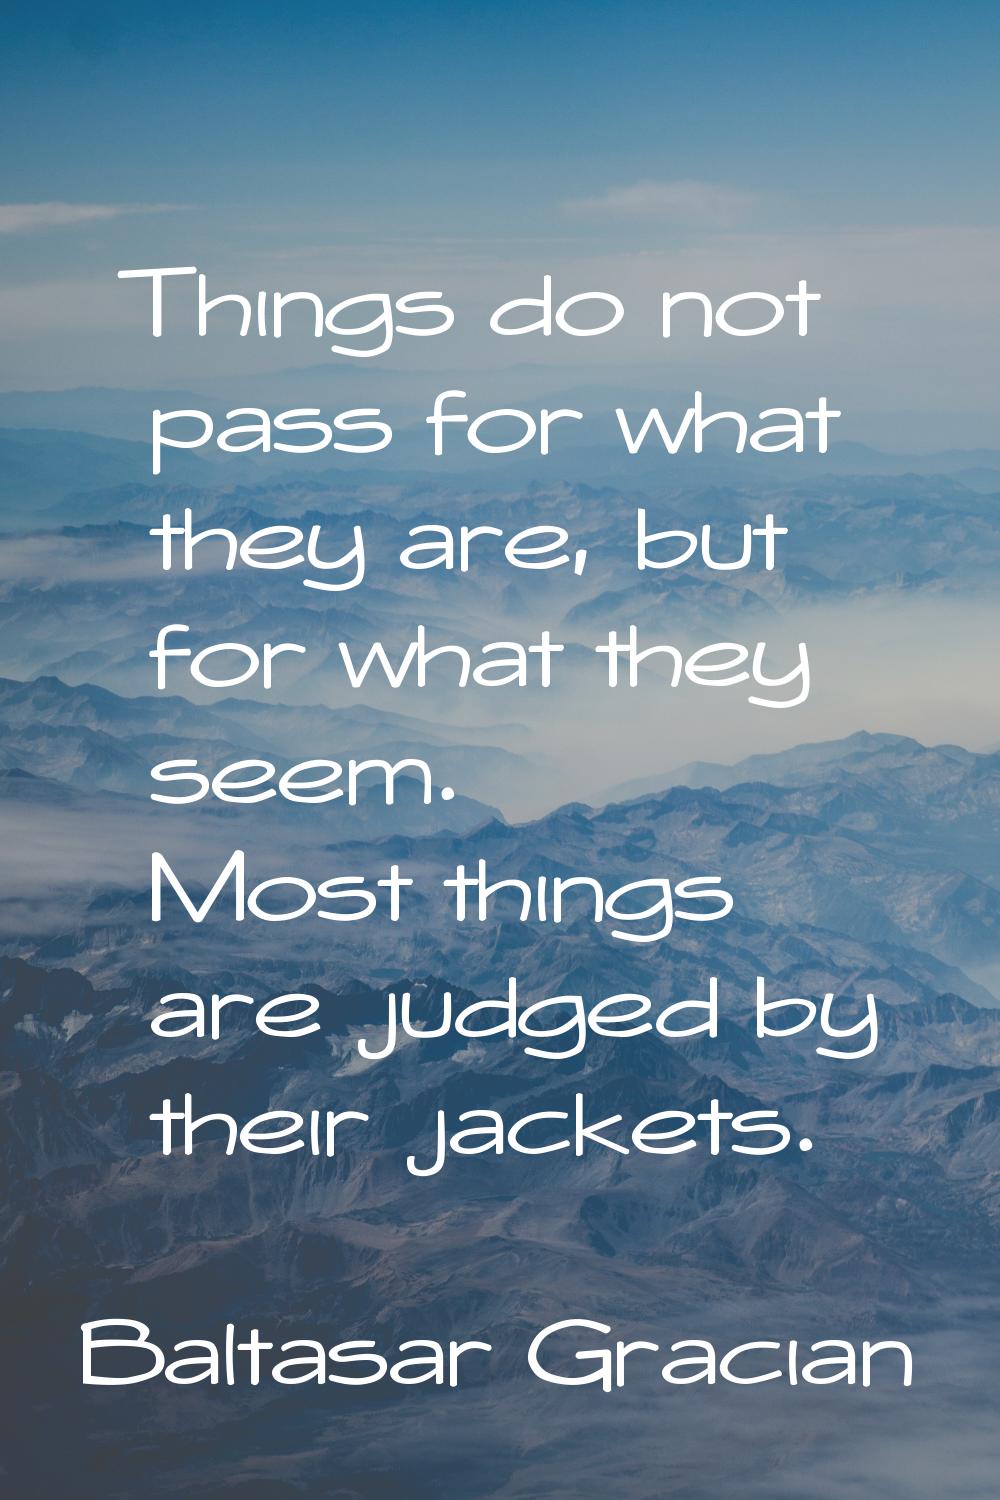 Things do not pass for what they are, but for what they seem. Most things are judged by their jacke